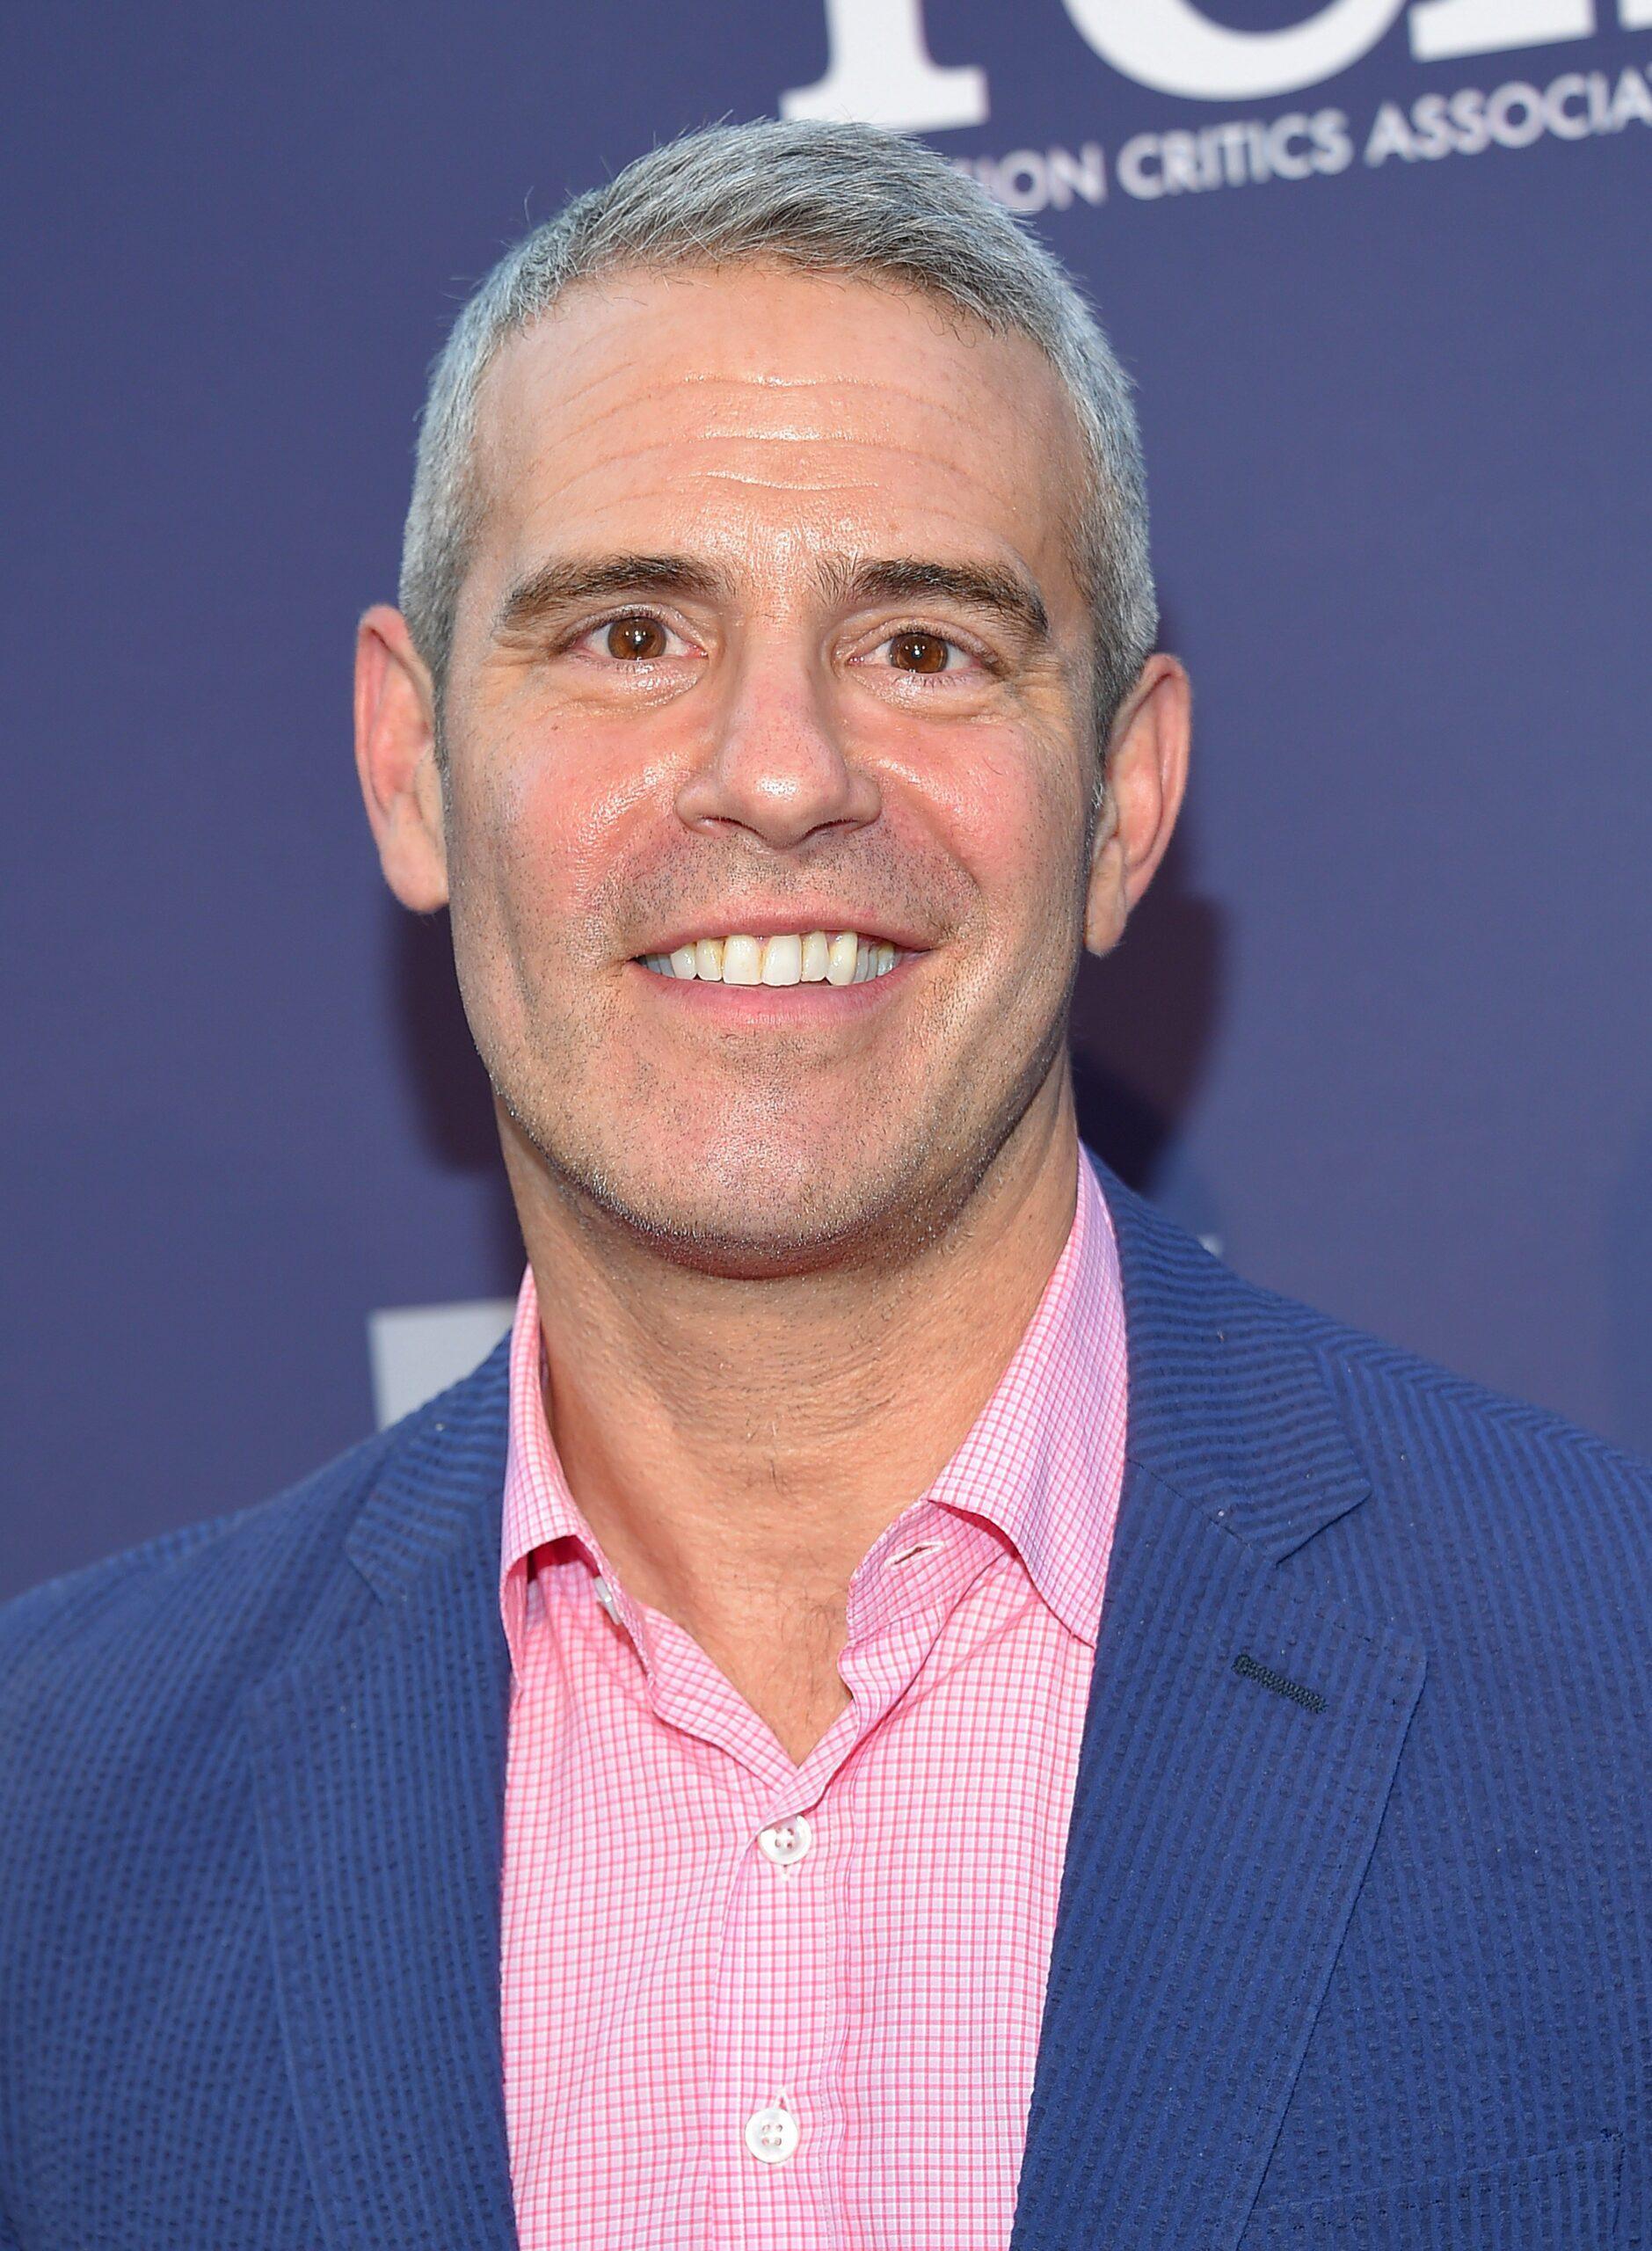 A photo of Andy Cohen in a blue suit and pink inner T-shirt at an event.